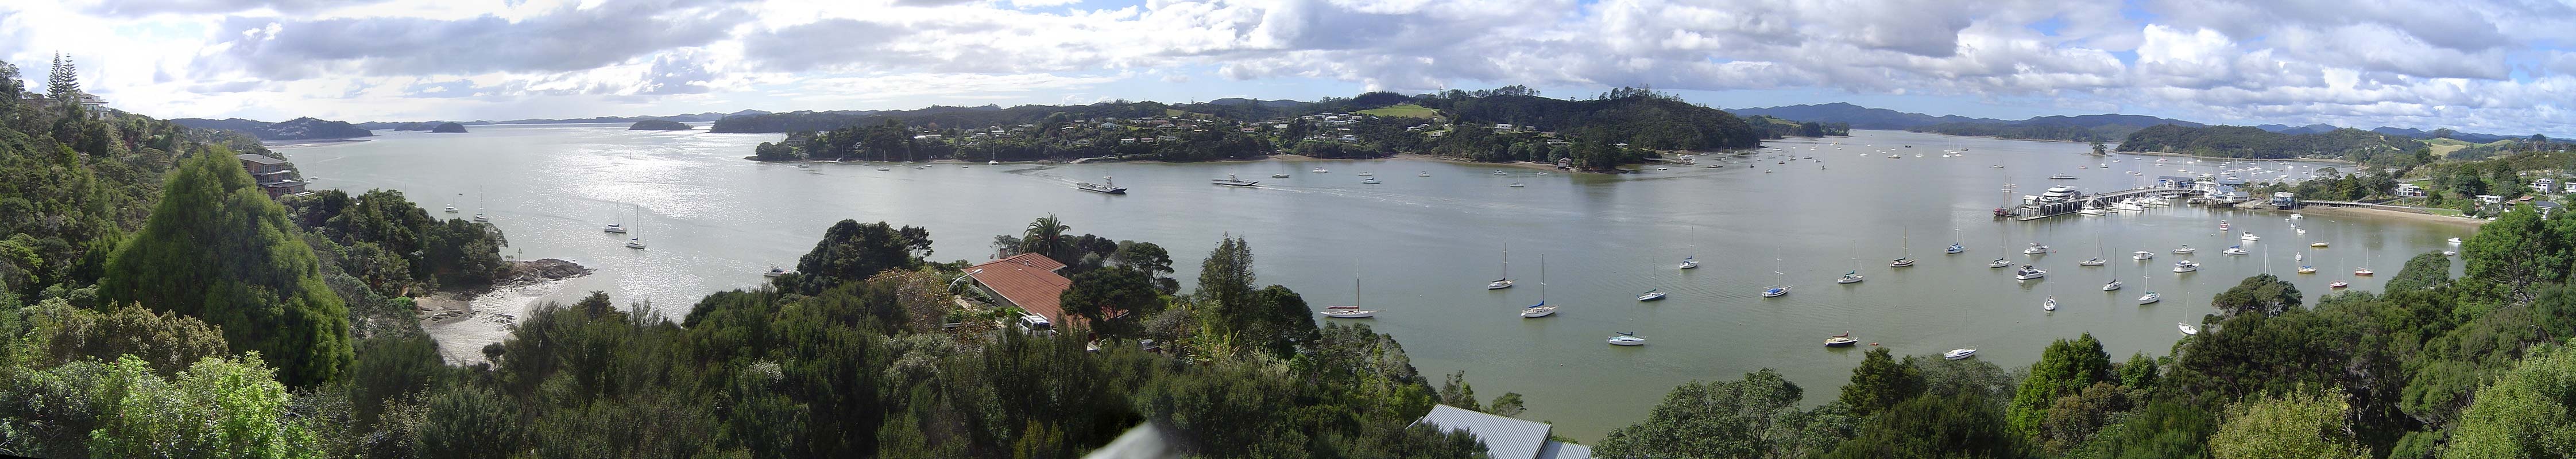 view of Bay of Islands